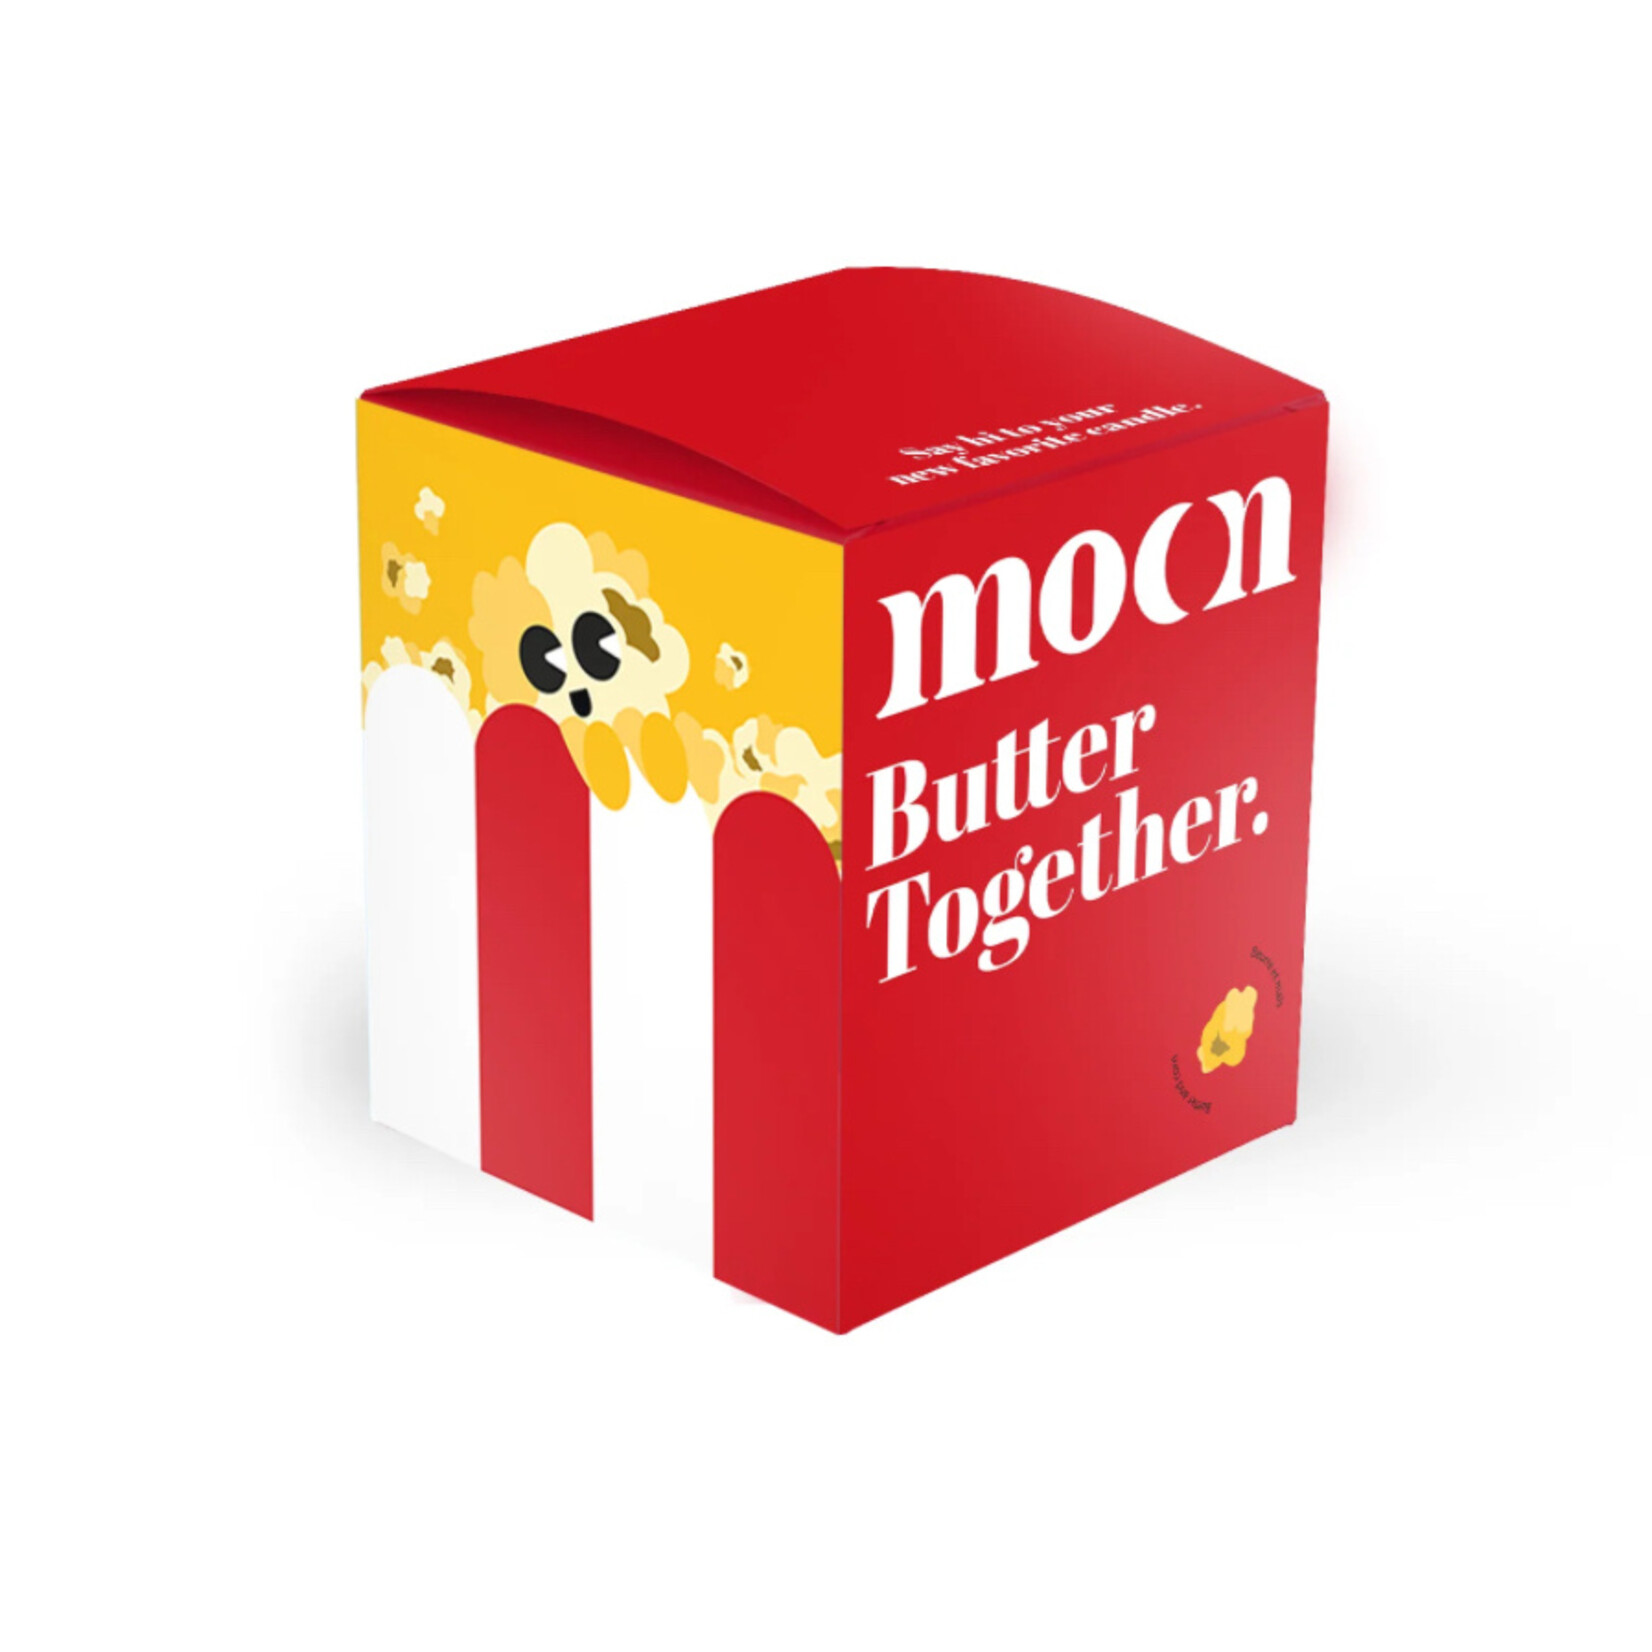 Moonday Butter Together